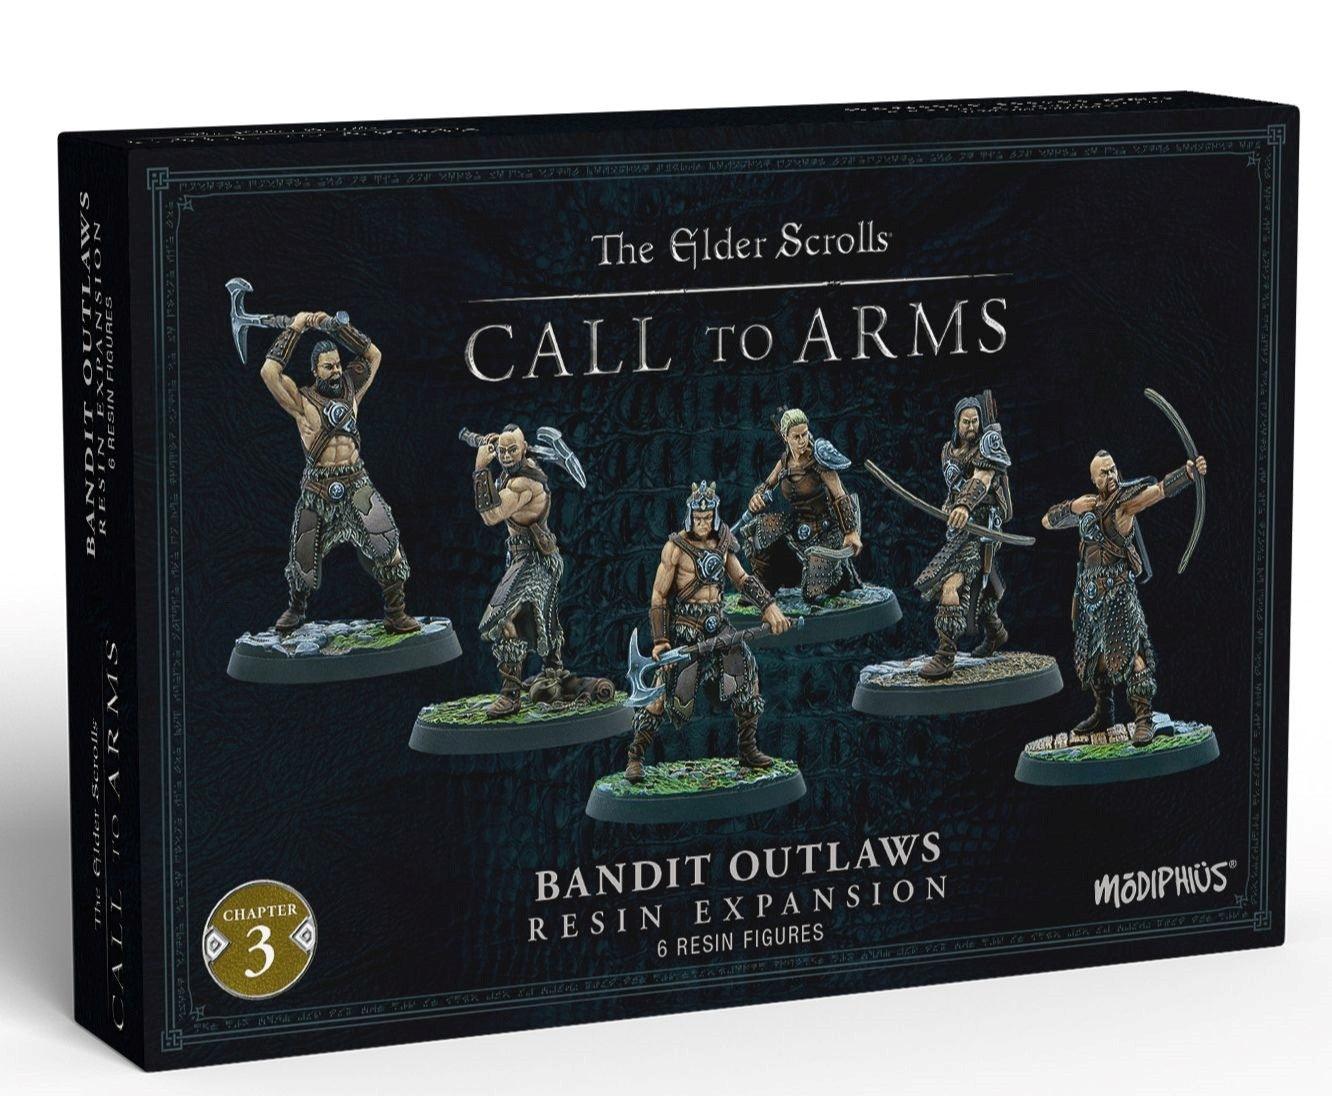 VR-103853 The Elder Scrolls Call to Arms Bandit Outlaws - Modiphius Entertainment - Titan Pop Culture